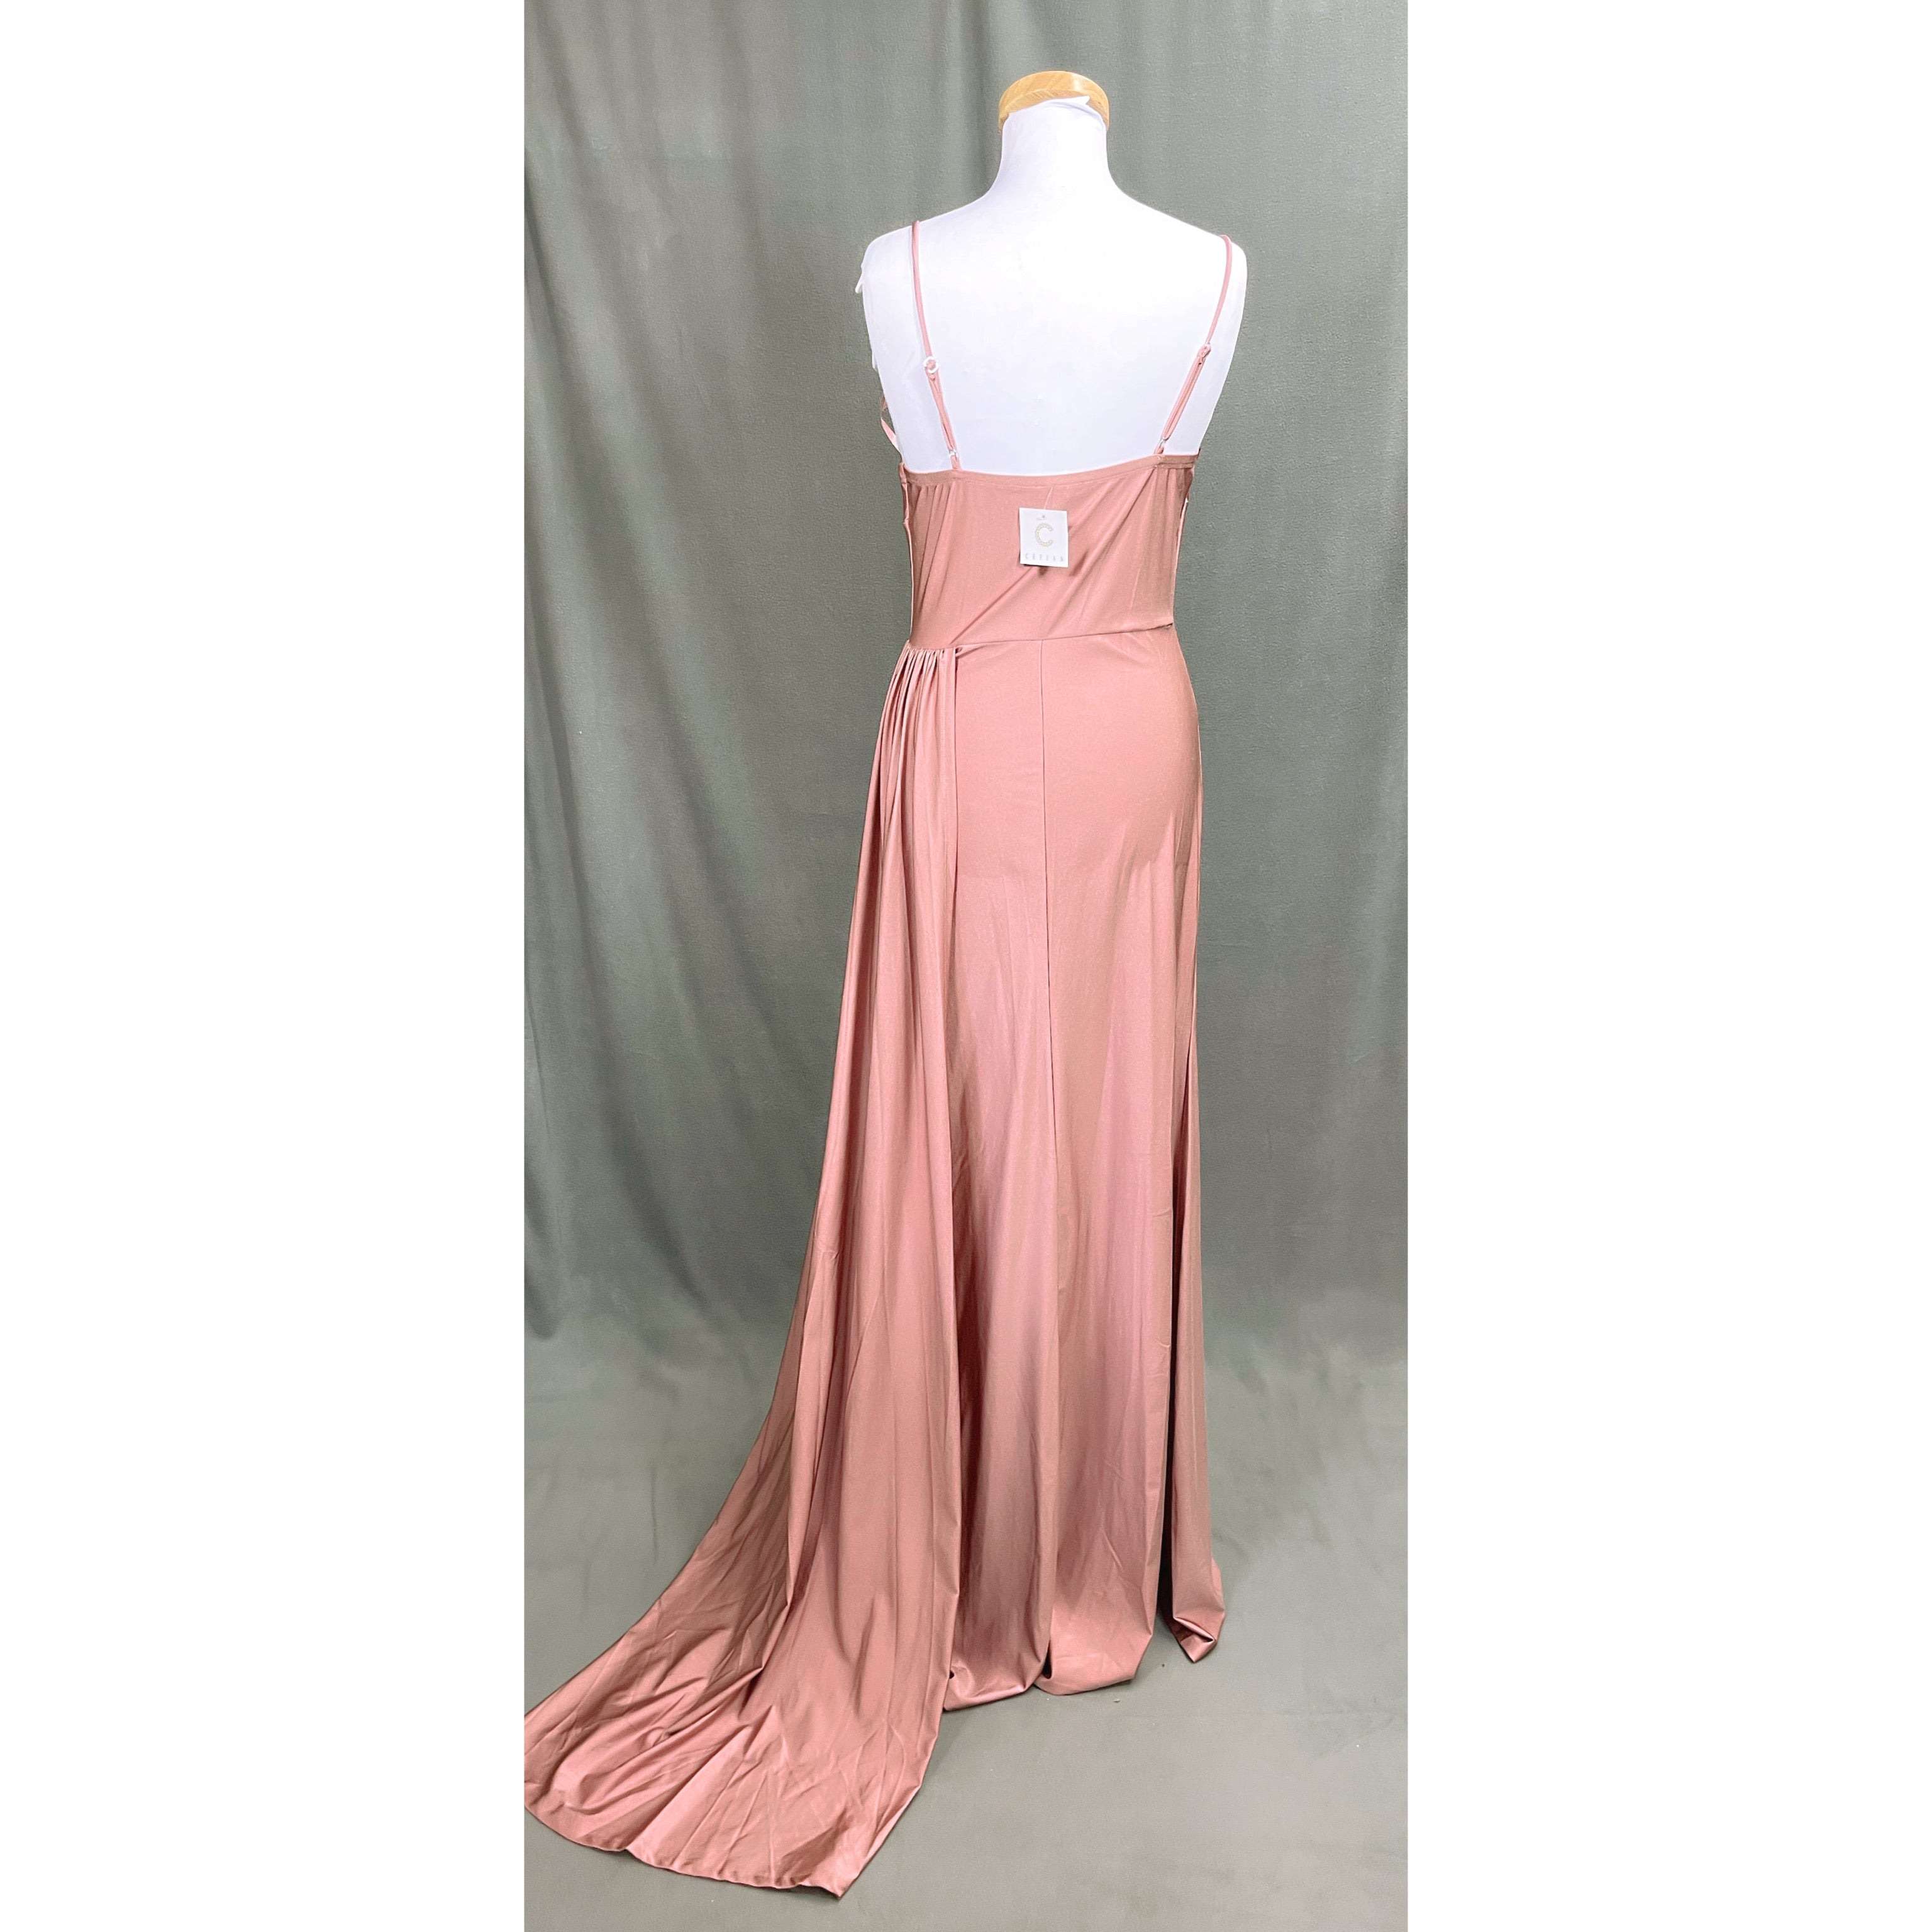 Cefian blush dress with train, sizes M & L, NEW WITH TAGS!